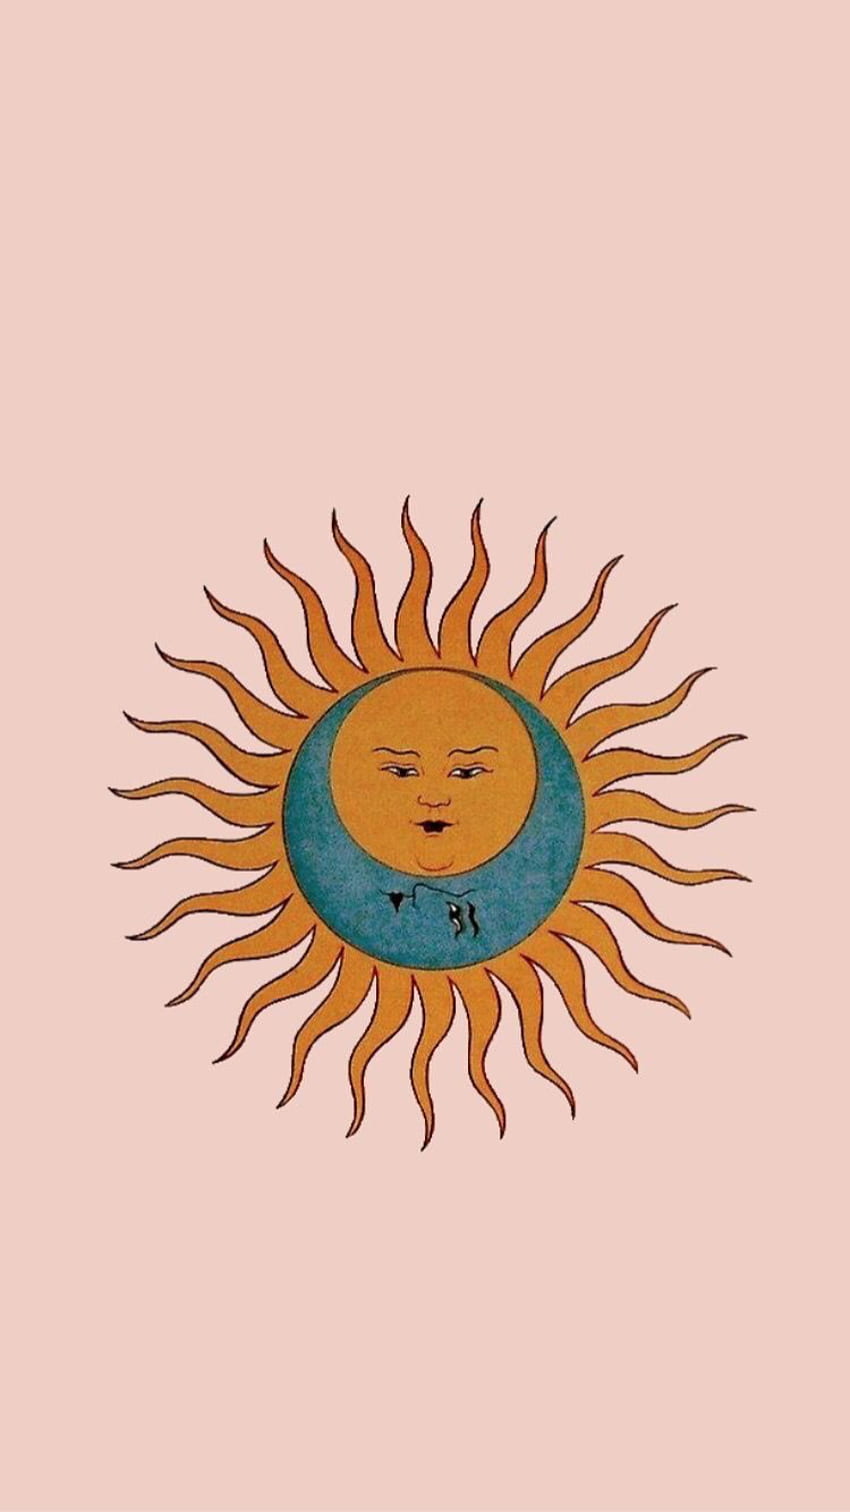 The sun and moon in a circle - Sun